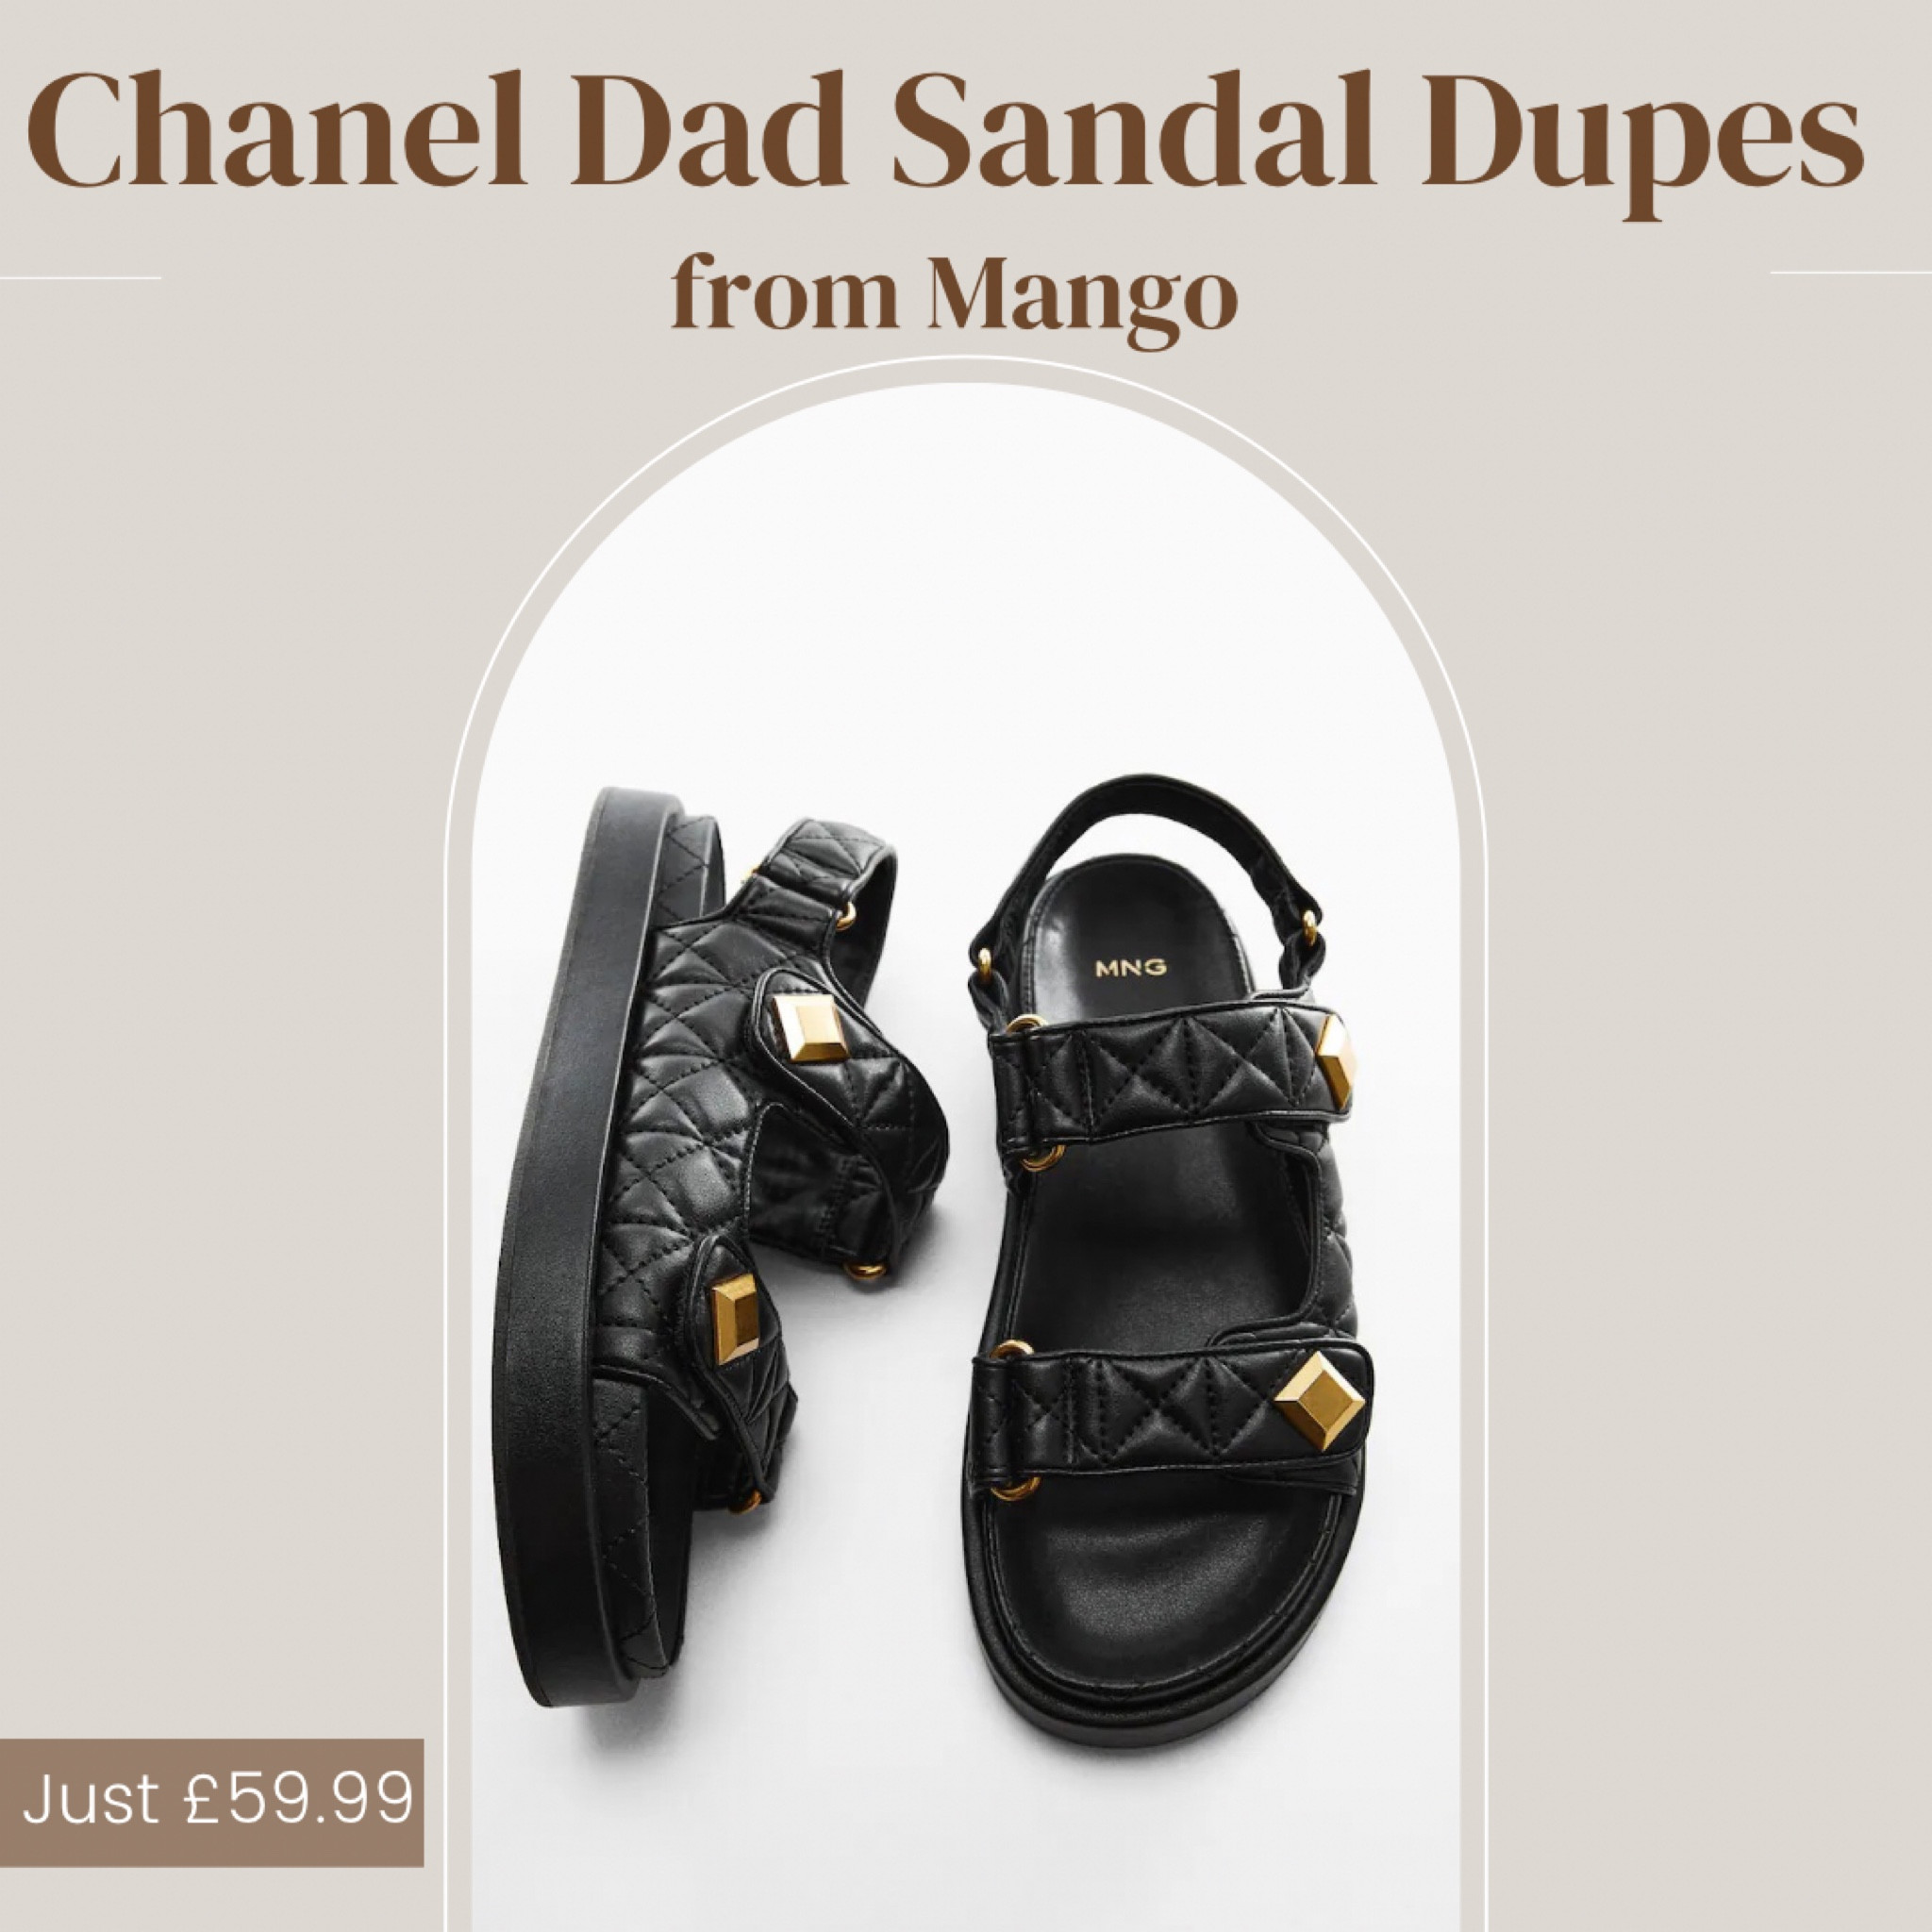 Best chunky dad sandals: From Chanel dupes to Birkenstocks